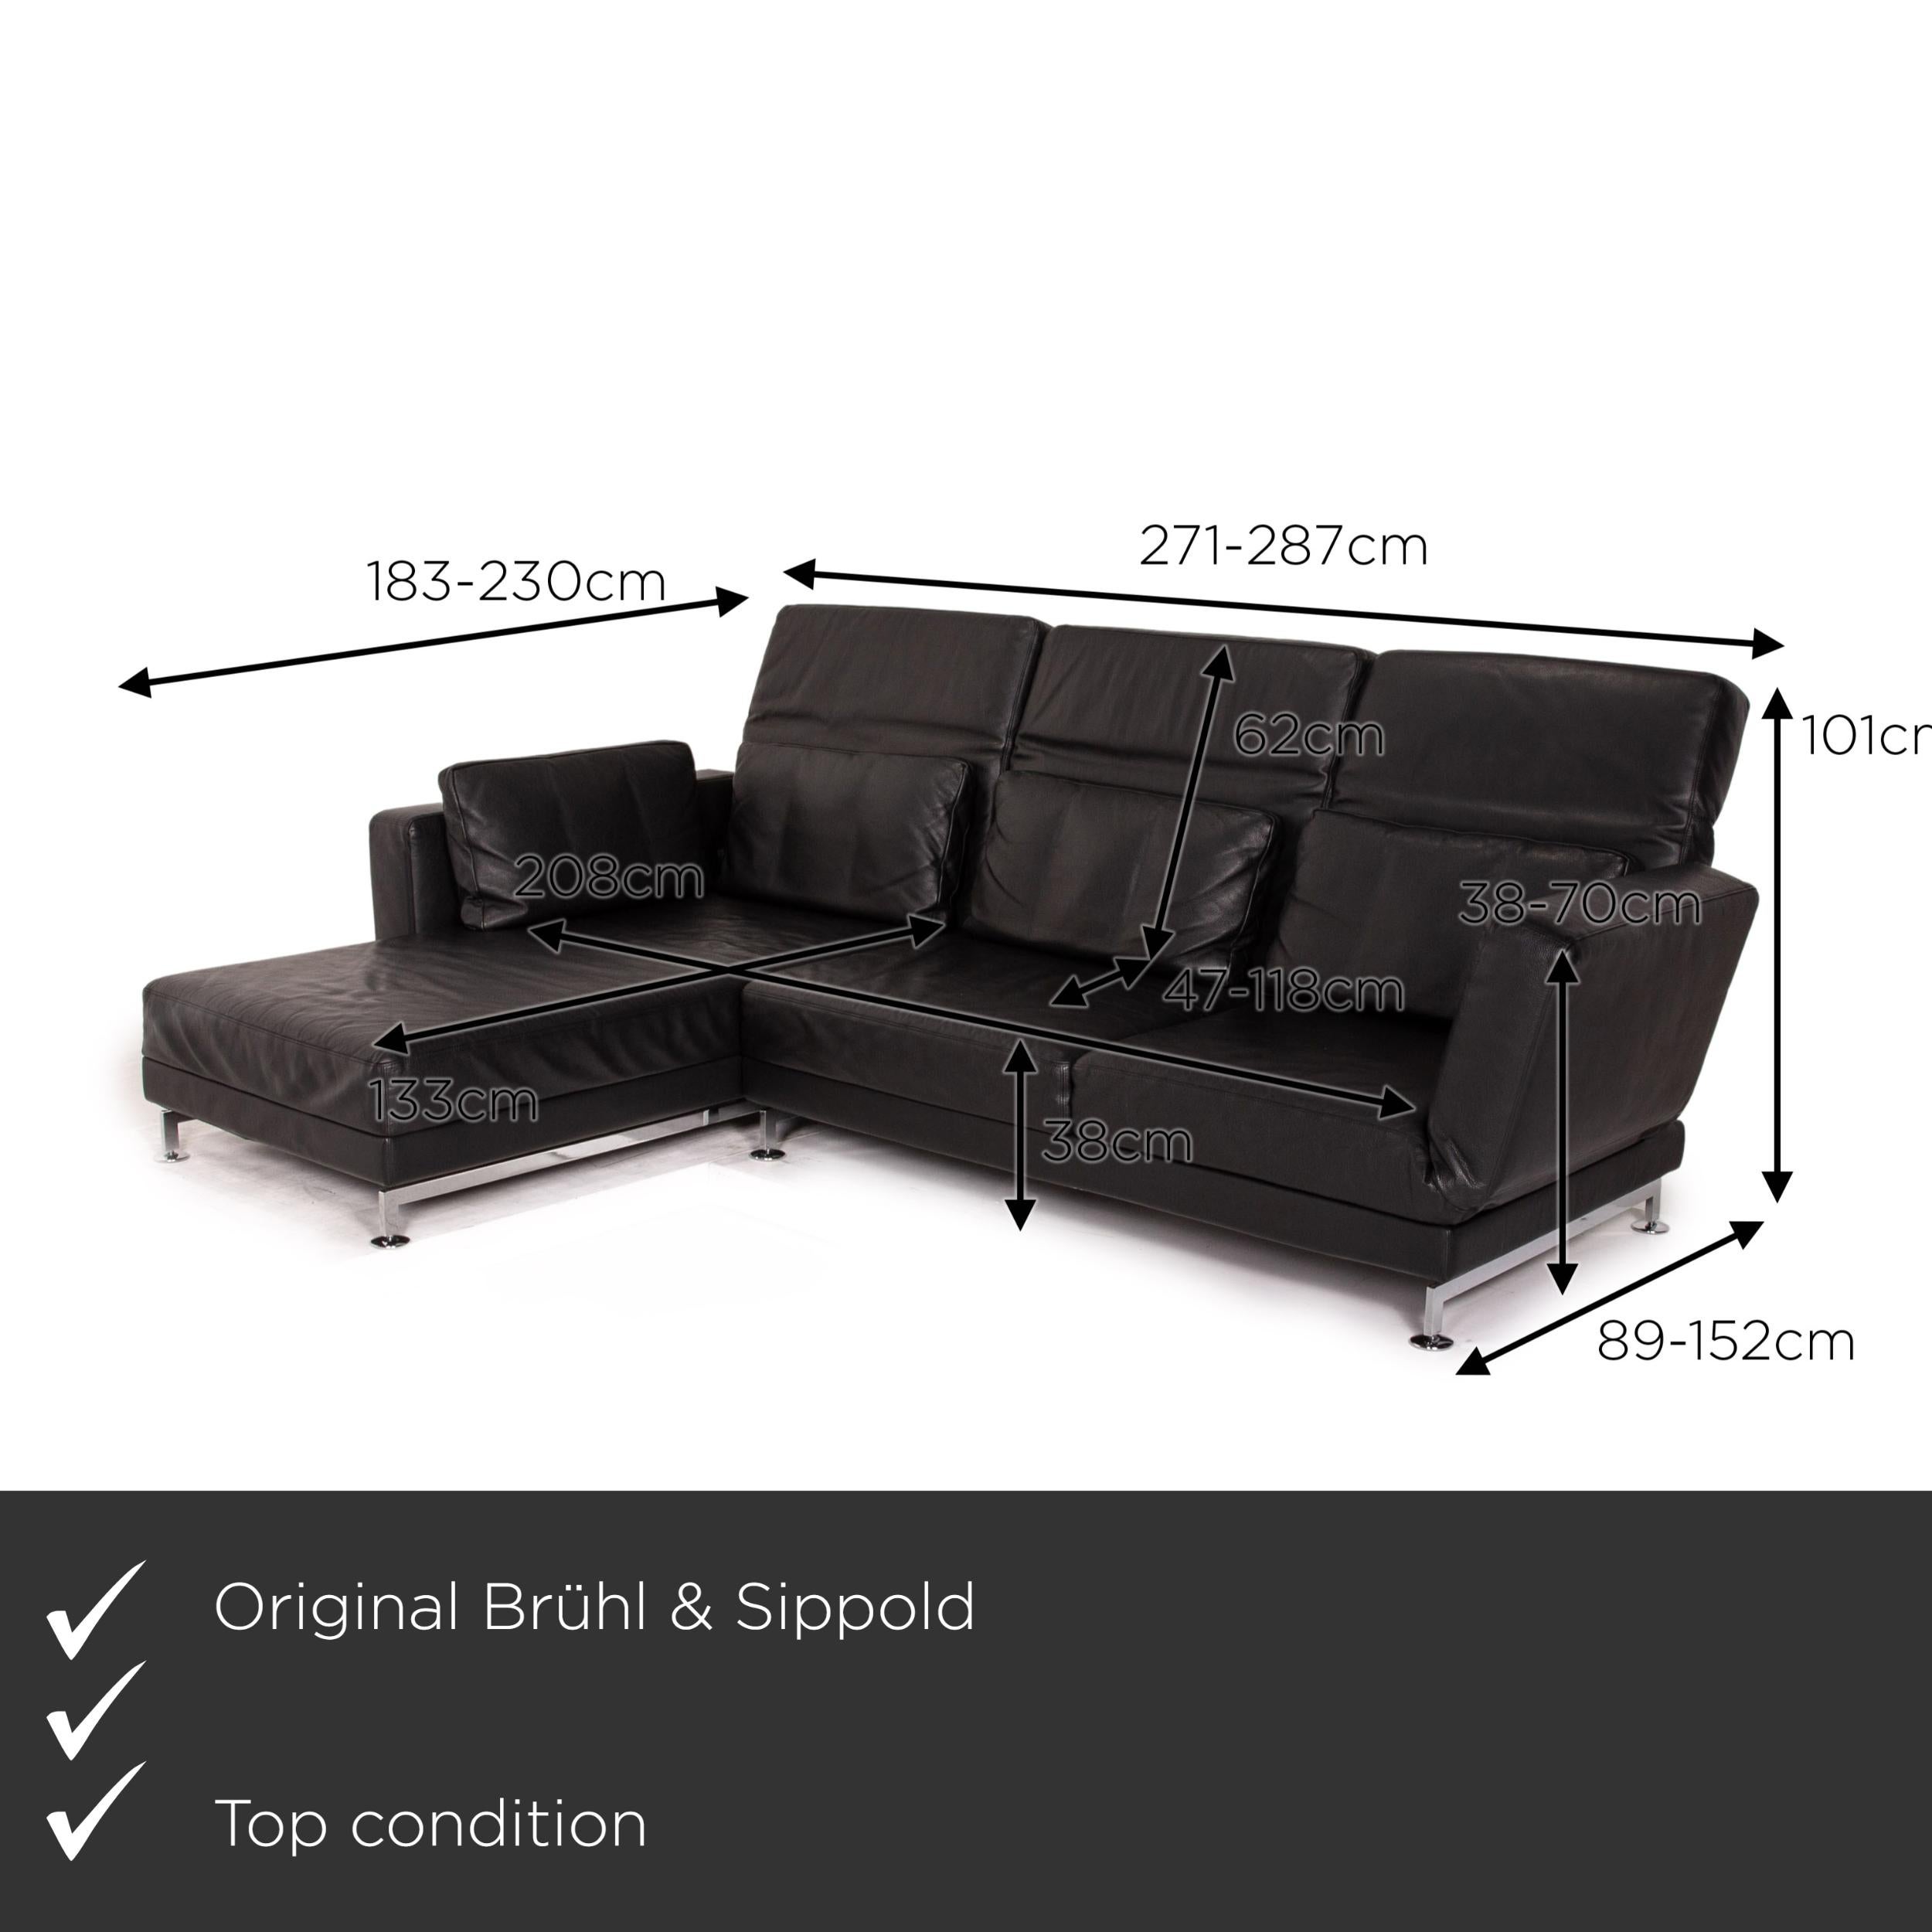 We present to you a Brühl & Sippold Moule leather corner sofa black function relax function couch.


 Product measurements in centimeters:
 

Depth: 89
Width: 271
Height: 101
Seat height: 38
Rest height: 38
Seat depth: 133
Seat width: